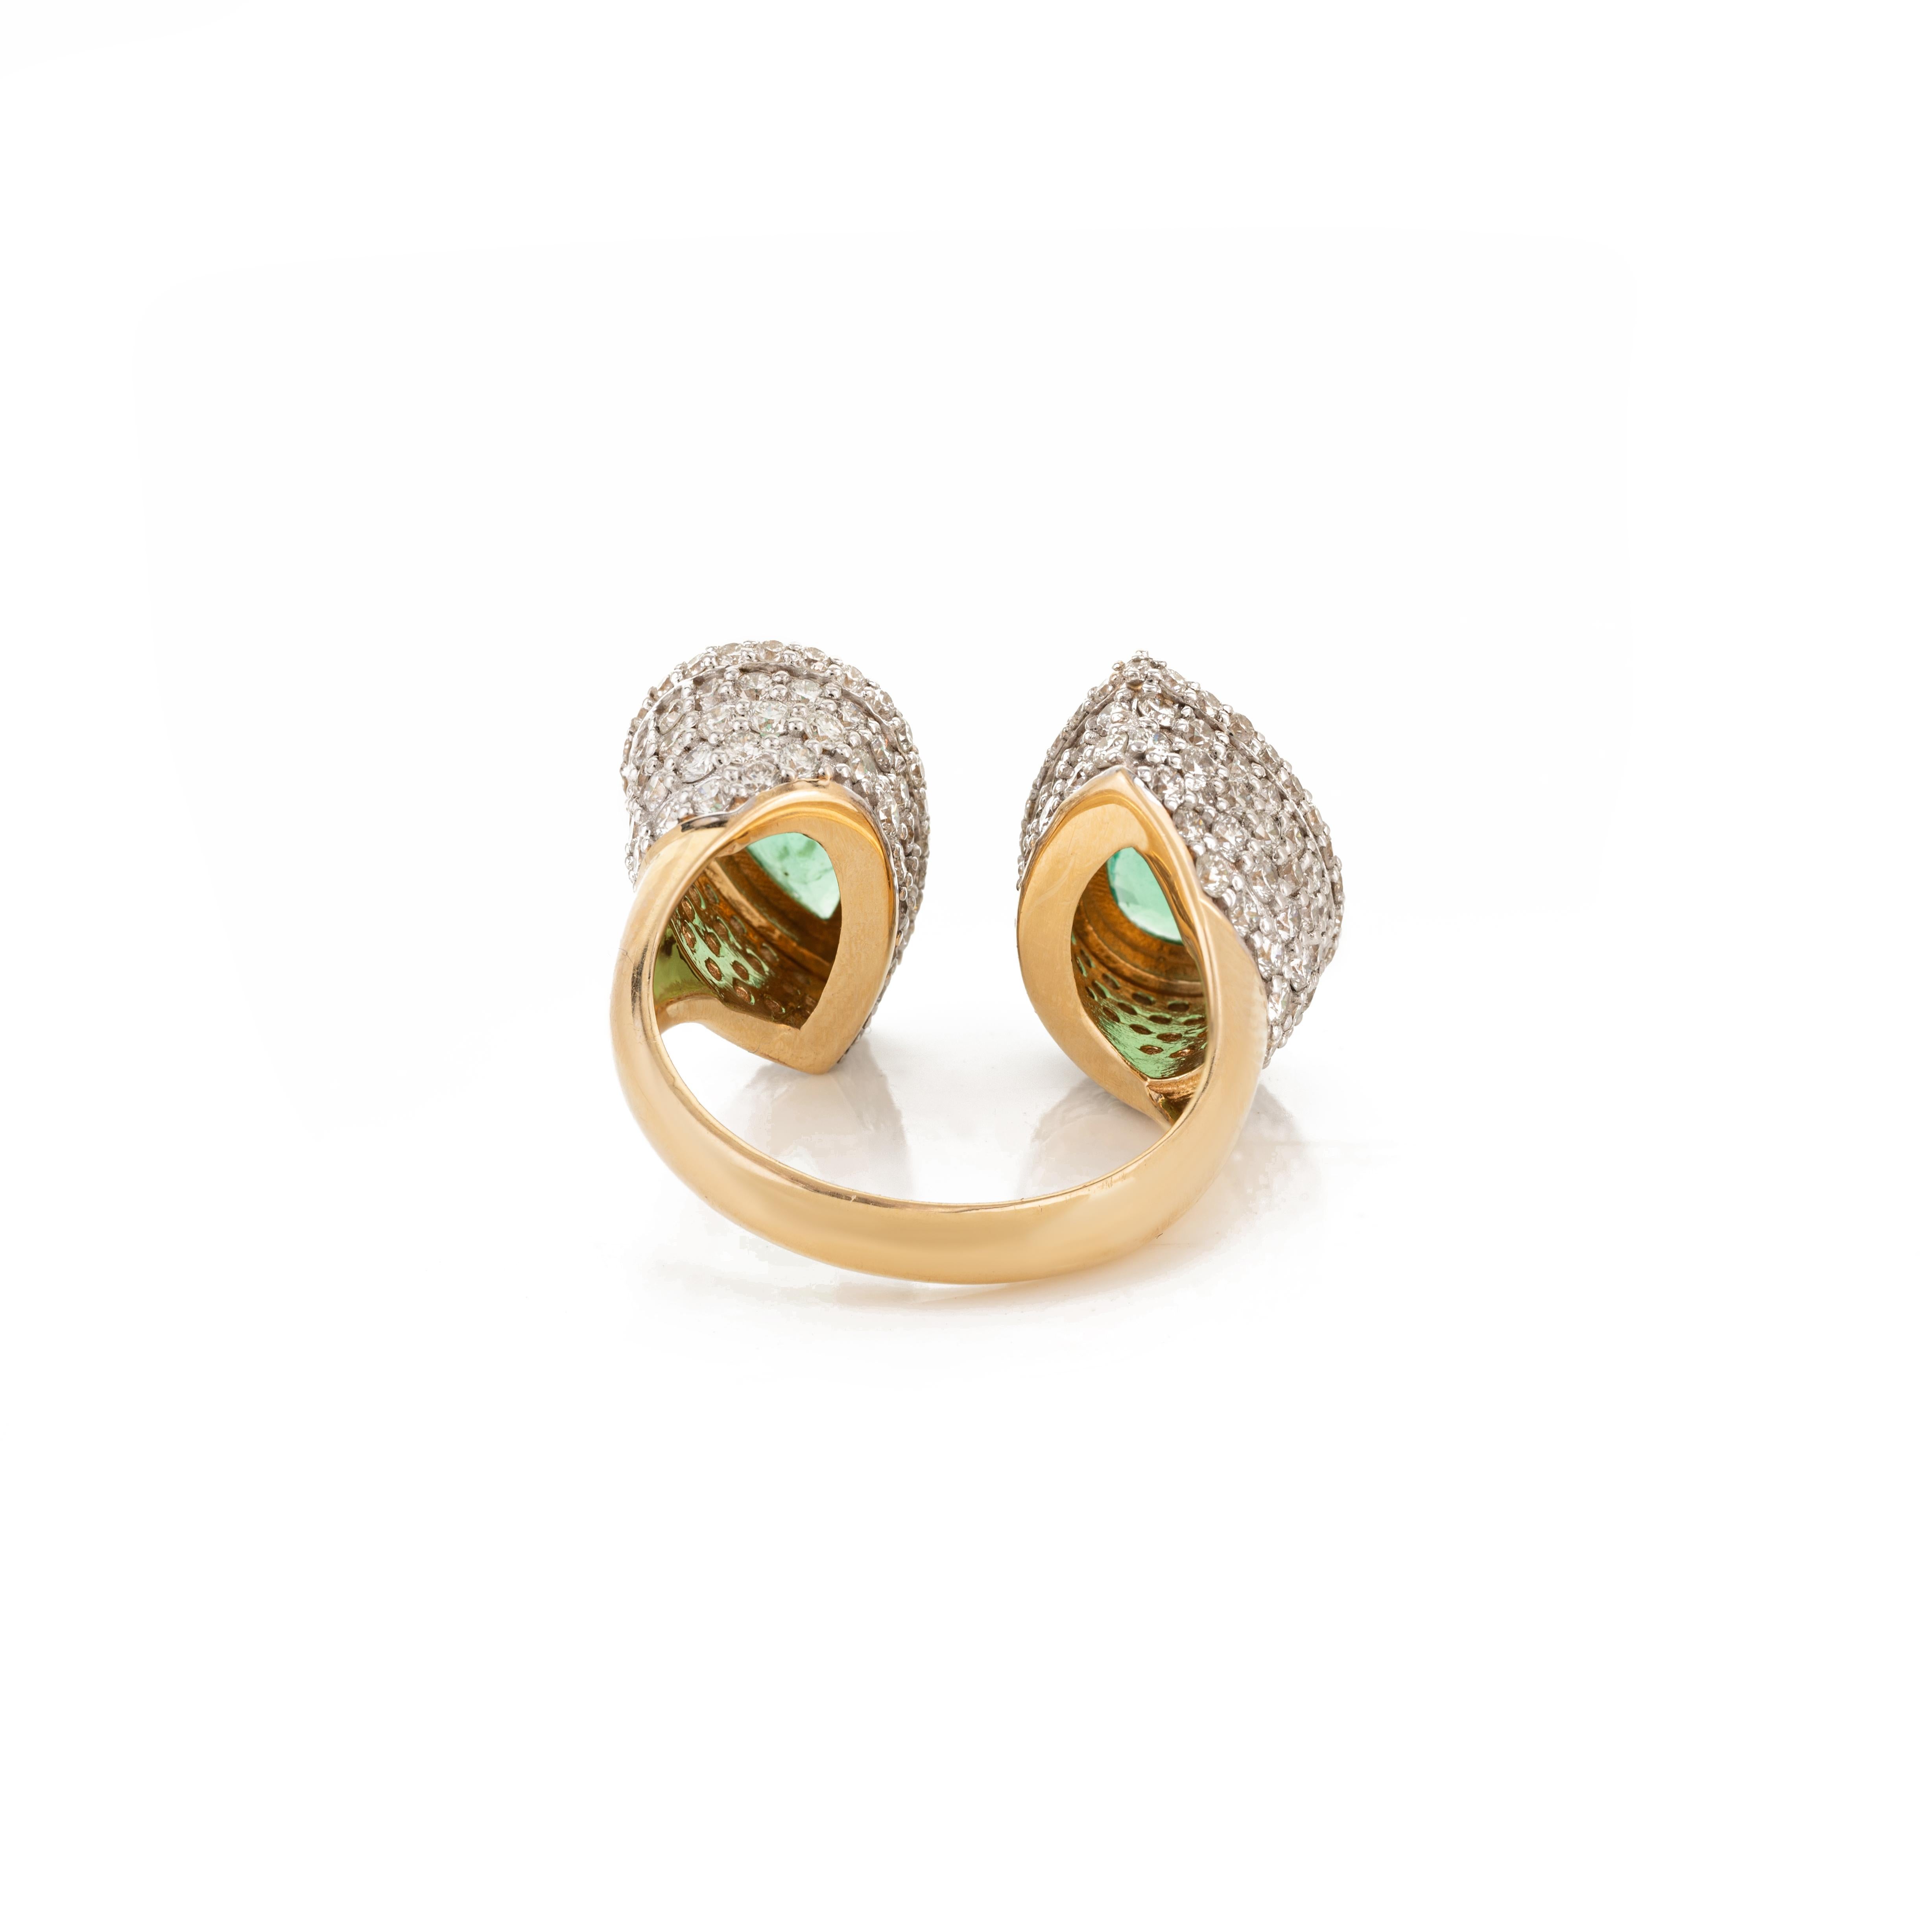 For Sale:  18k Yellow Gold 3.13 Carat Emerald and 3.38 Carat Halo Diamond Toi et Moi Ring 7